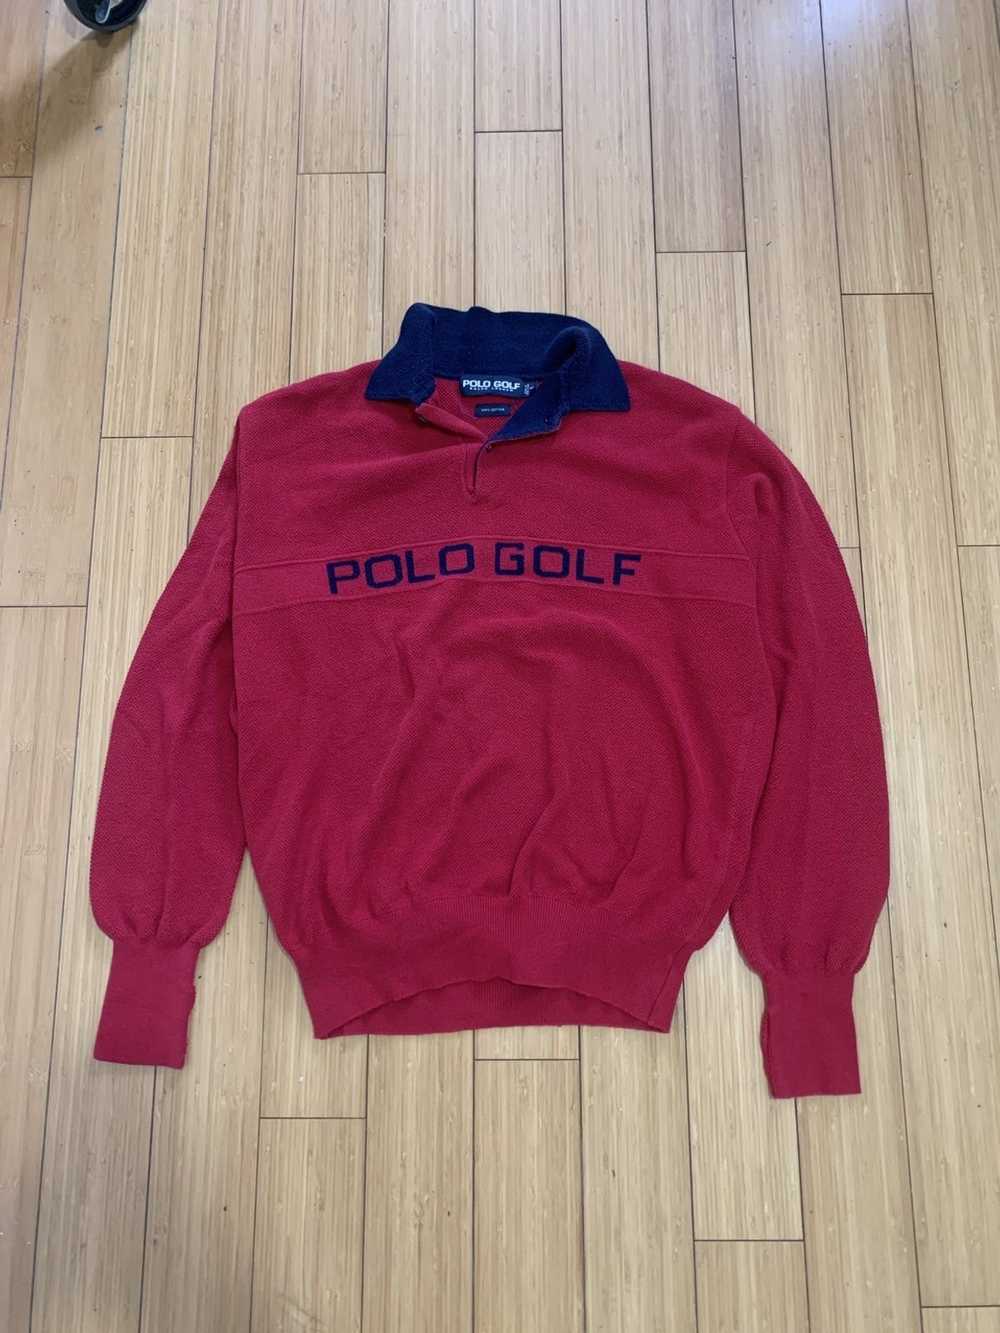 Polo Ralph Lauren × Vintage Polo Golf Knit Rugby - image 1